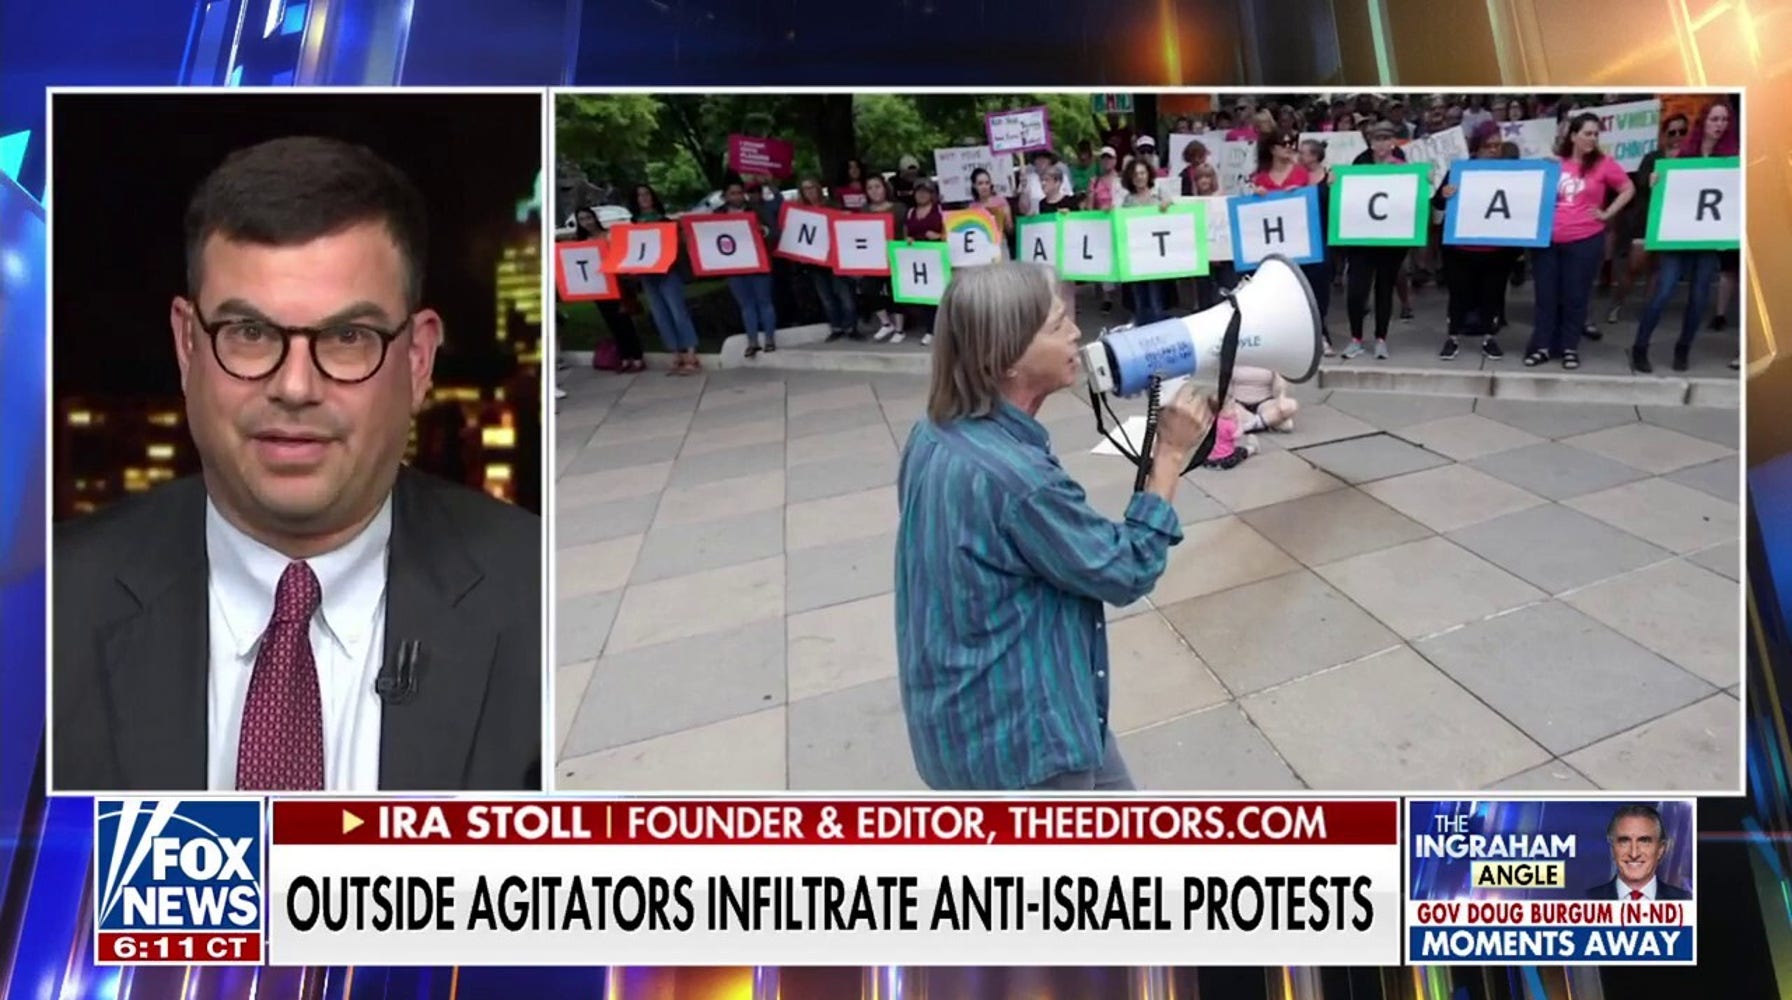 Professional Protesters Infiltrate Anti-Israel Protests at Columbia University